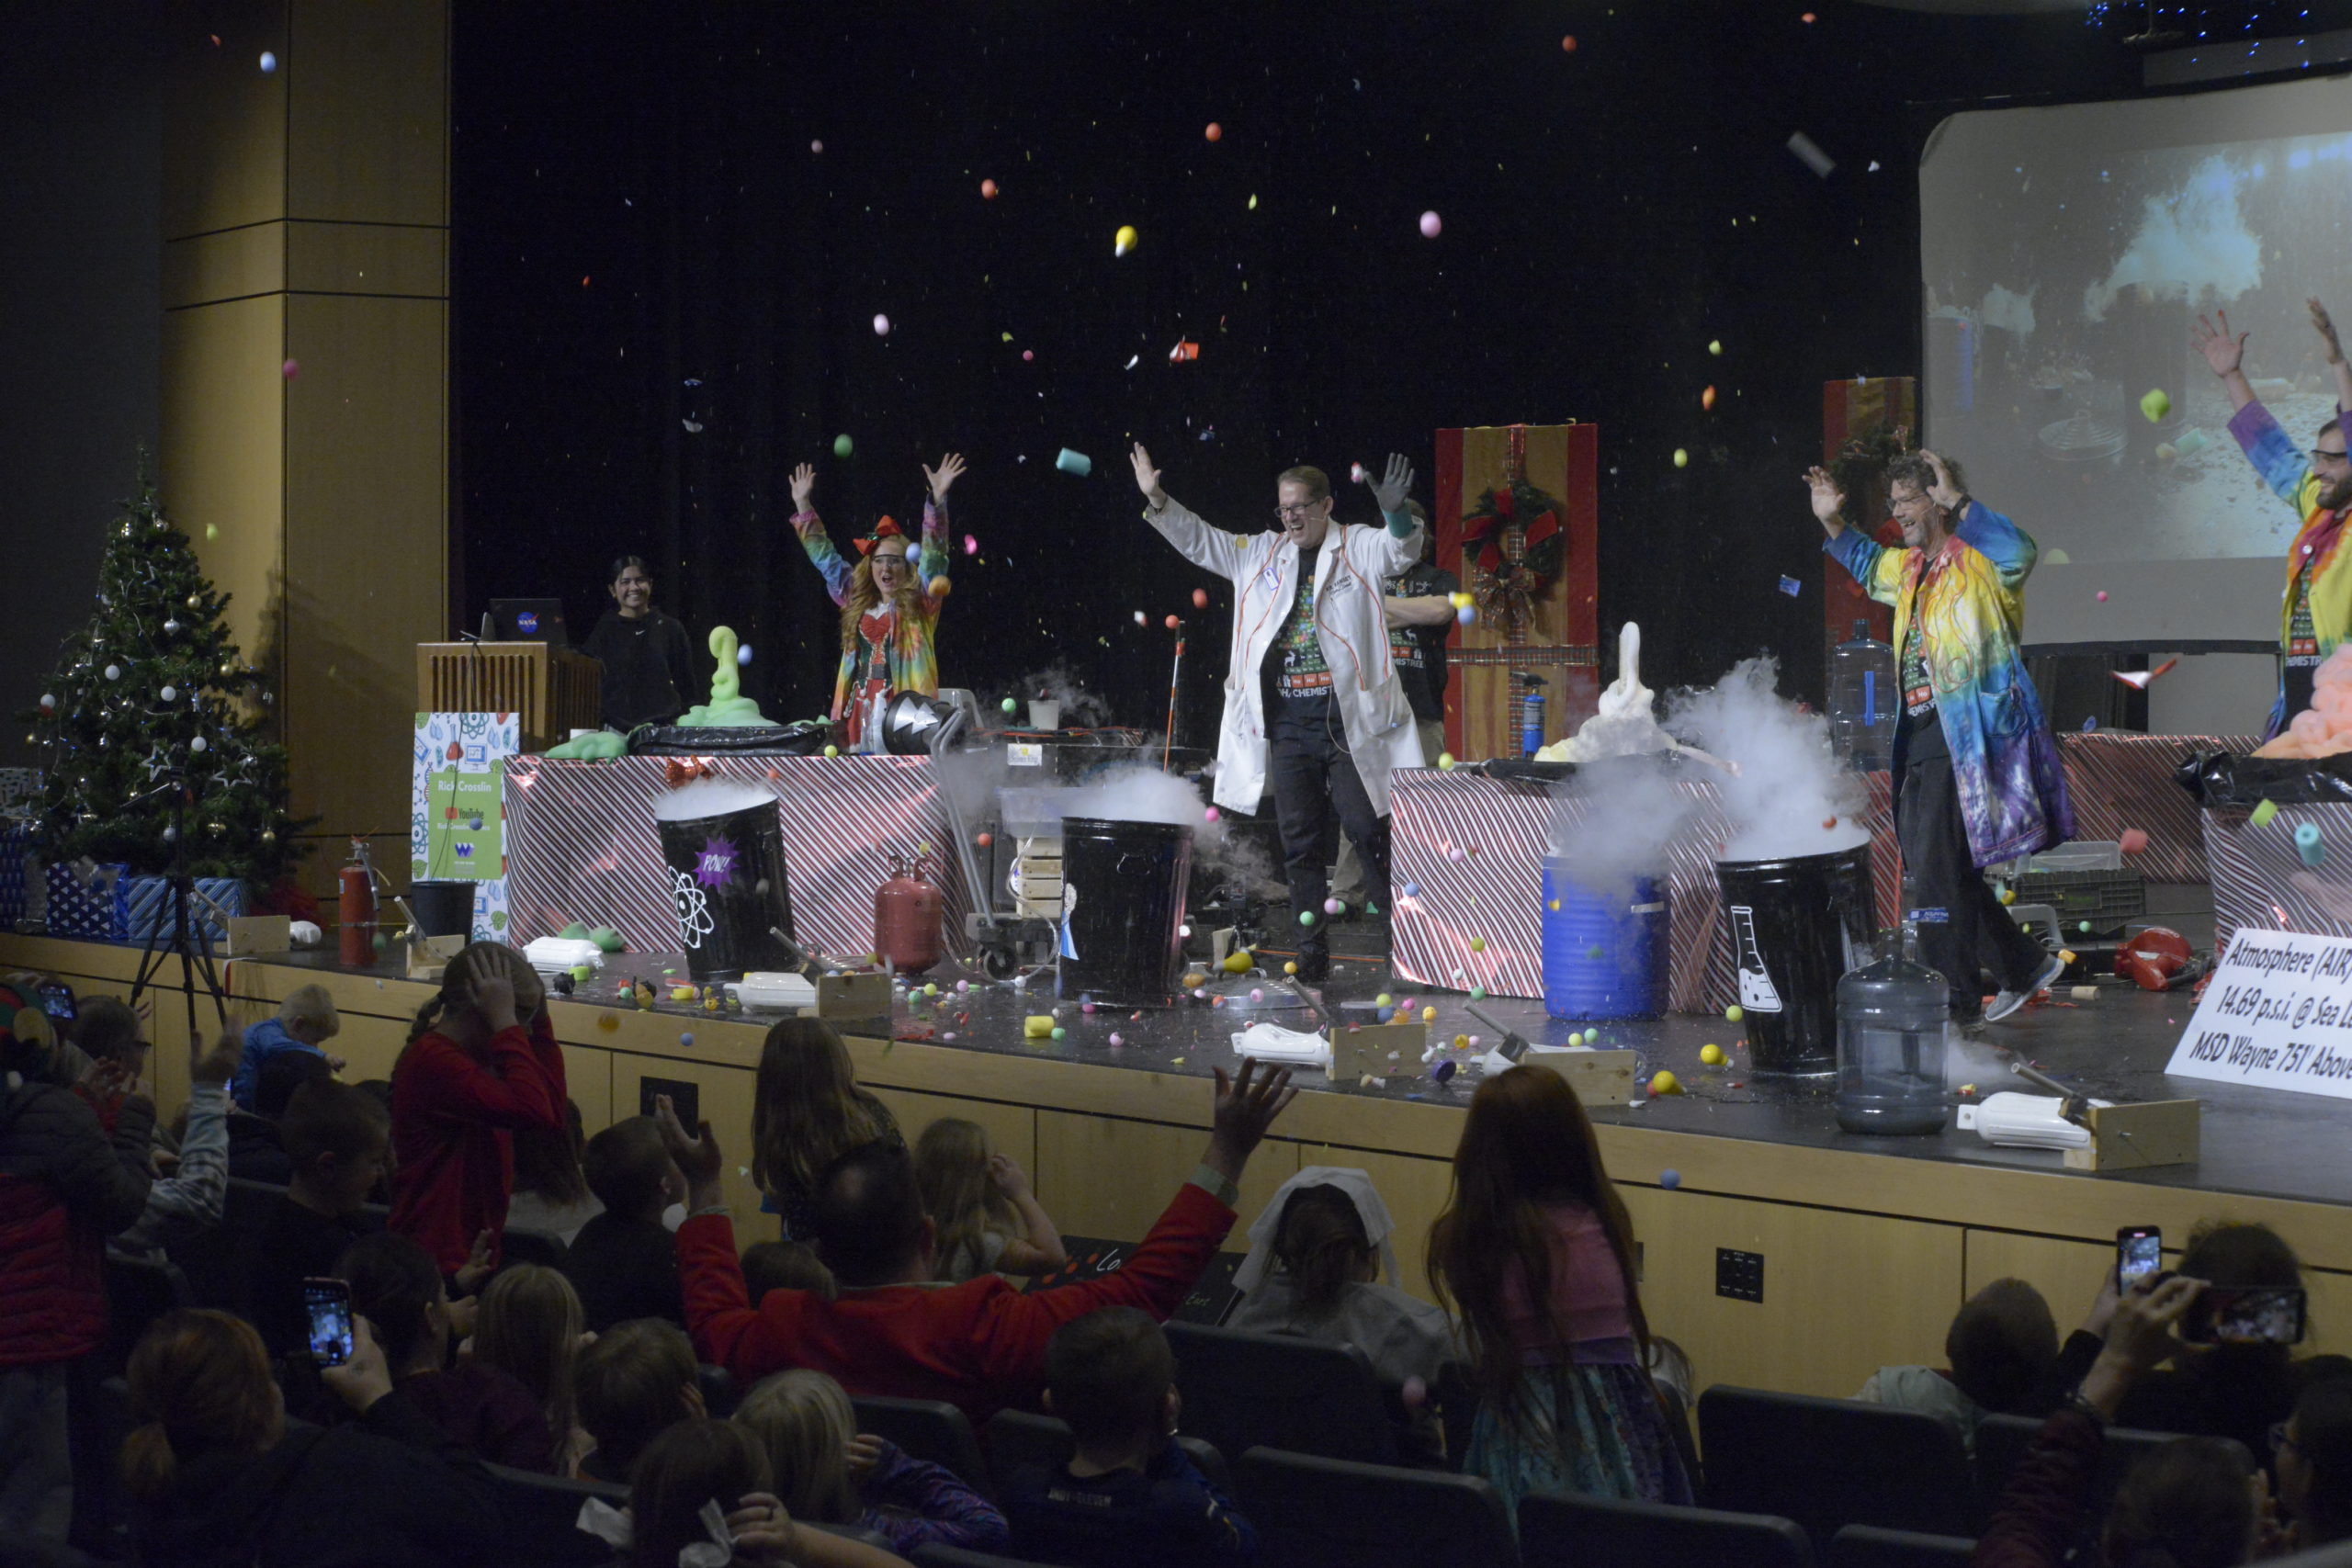 “Science Claus” Draws Hundreds for Evening of Fun